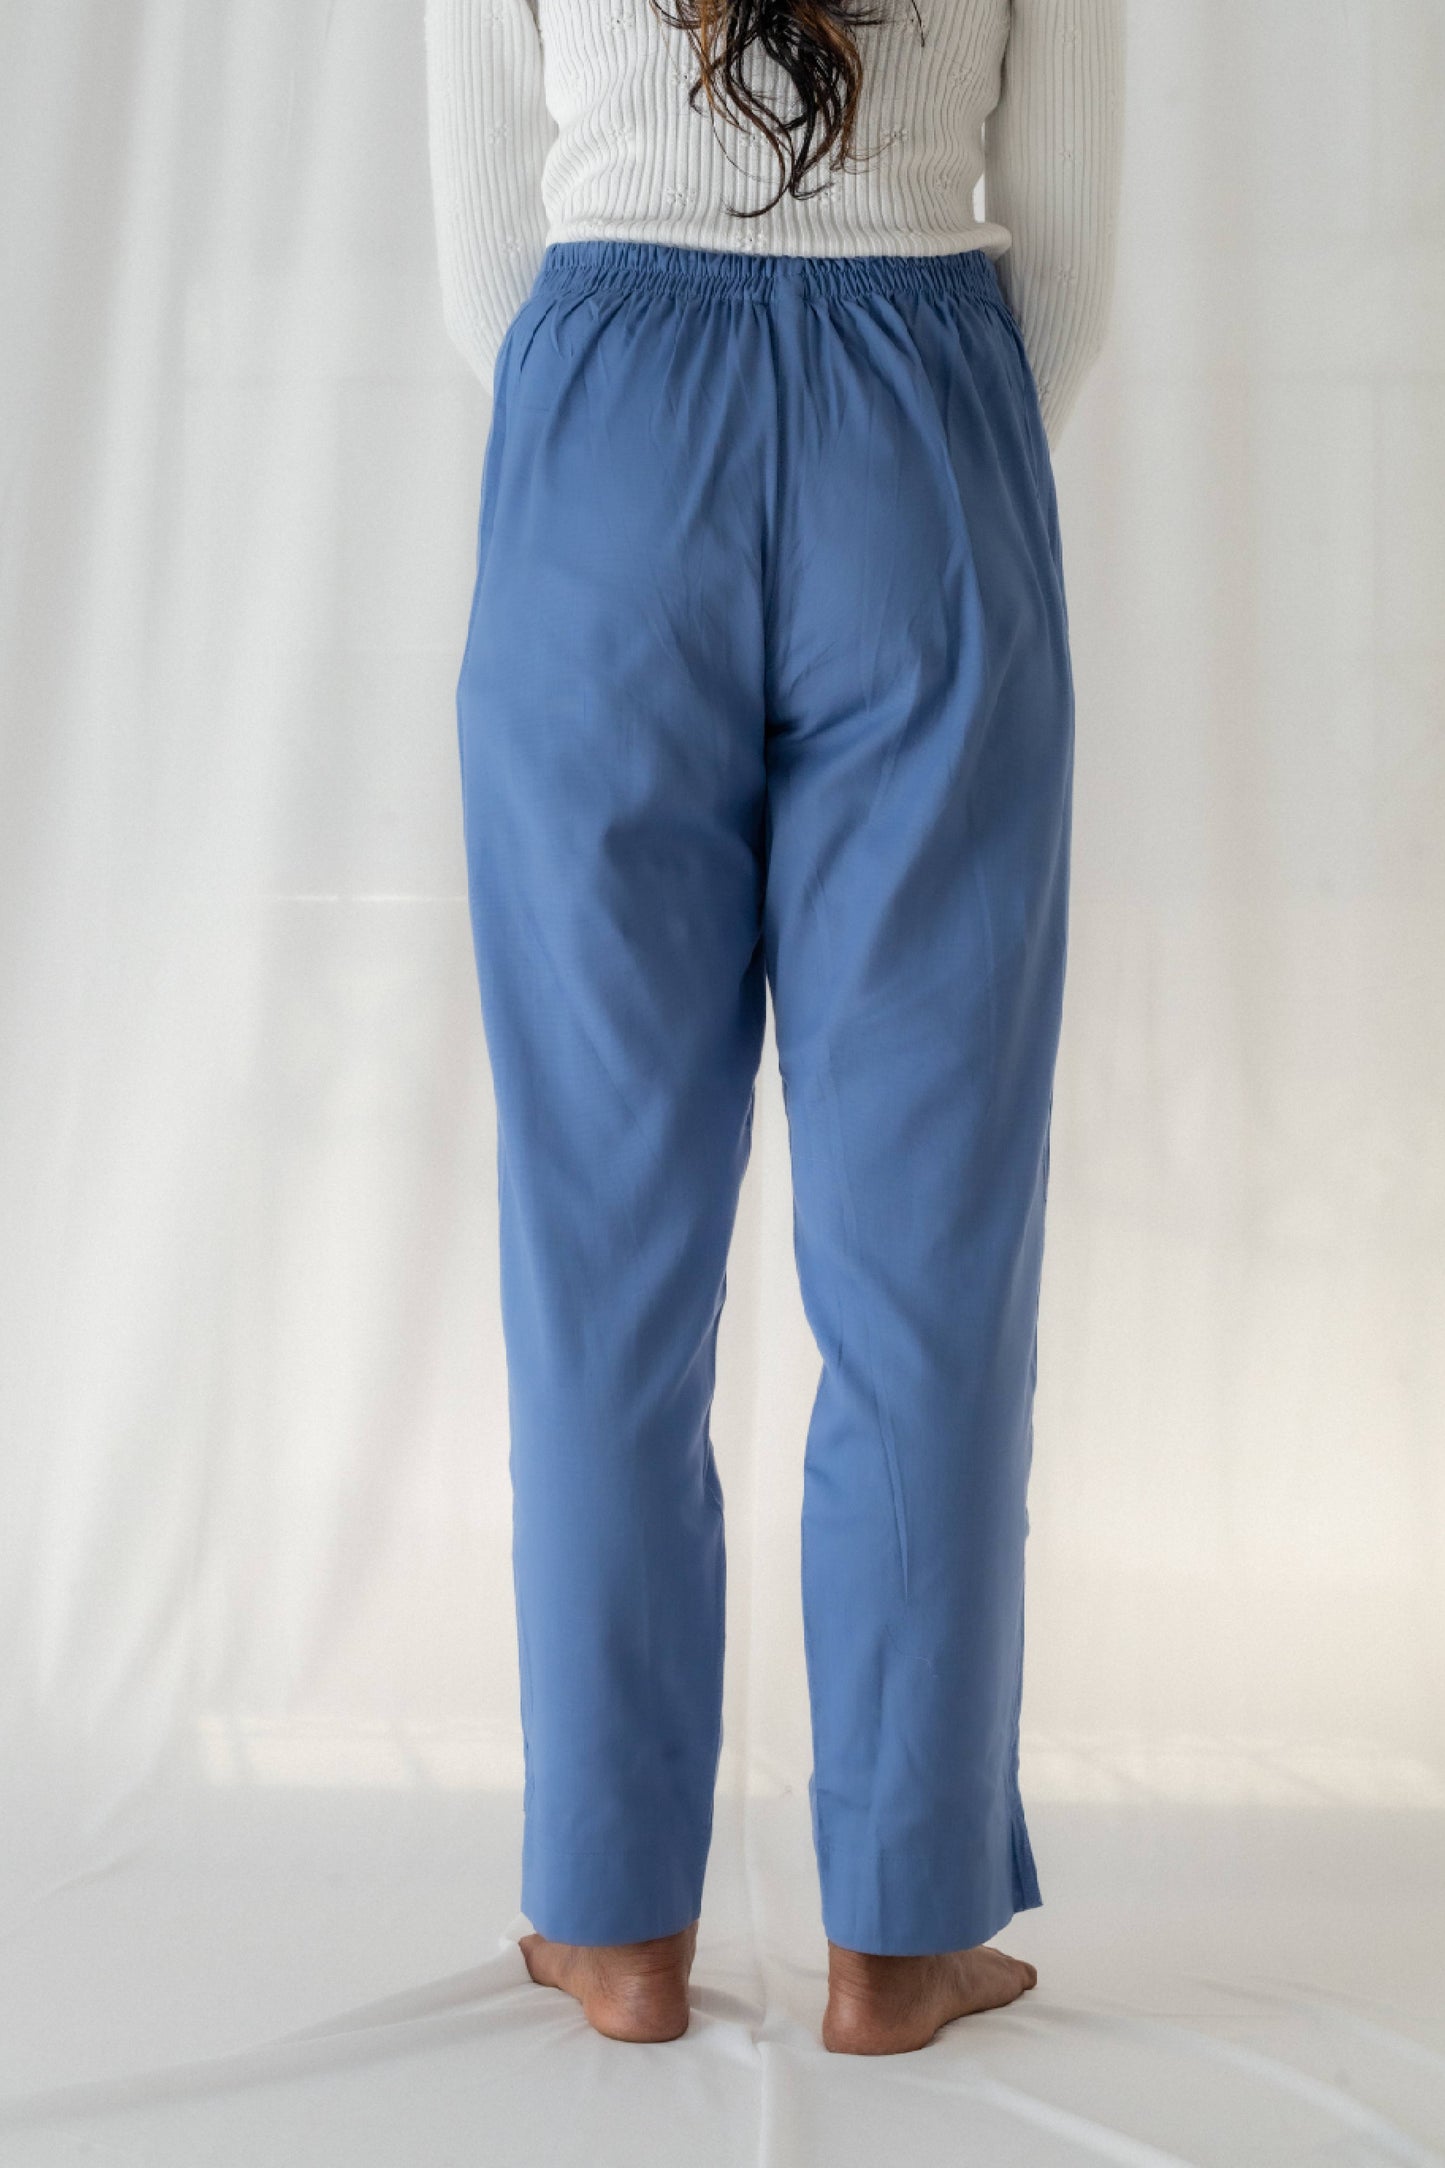 Solid Blue Cotton Pant For Women